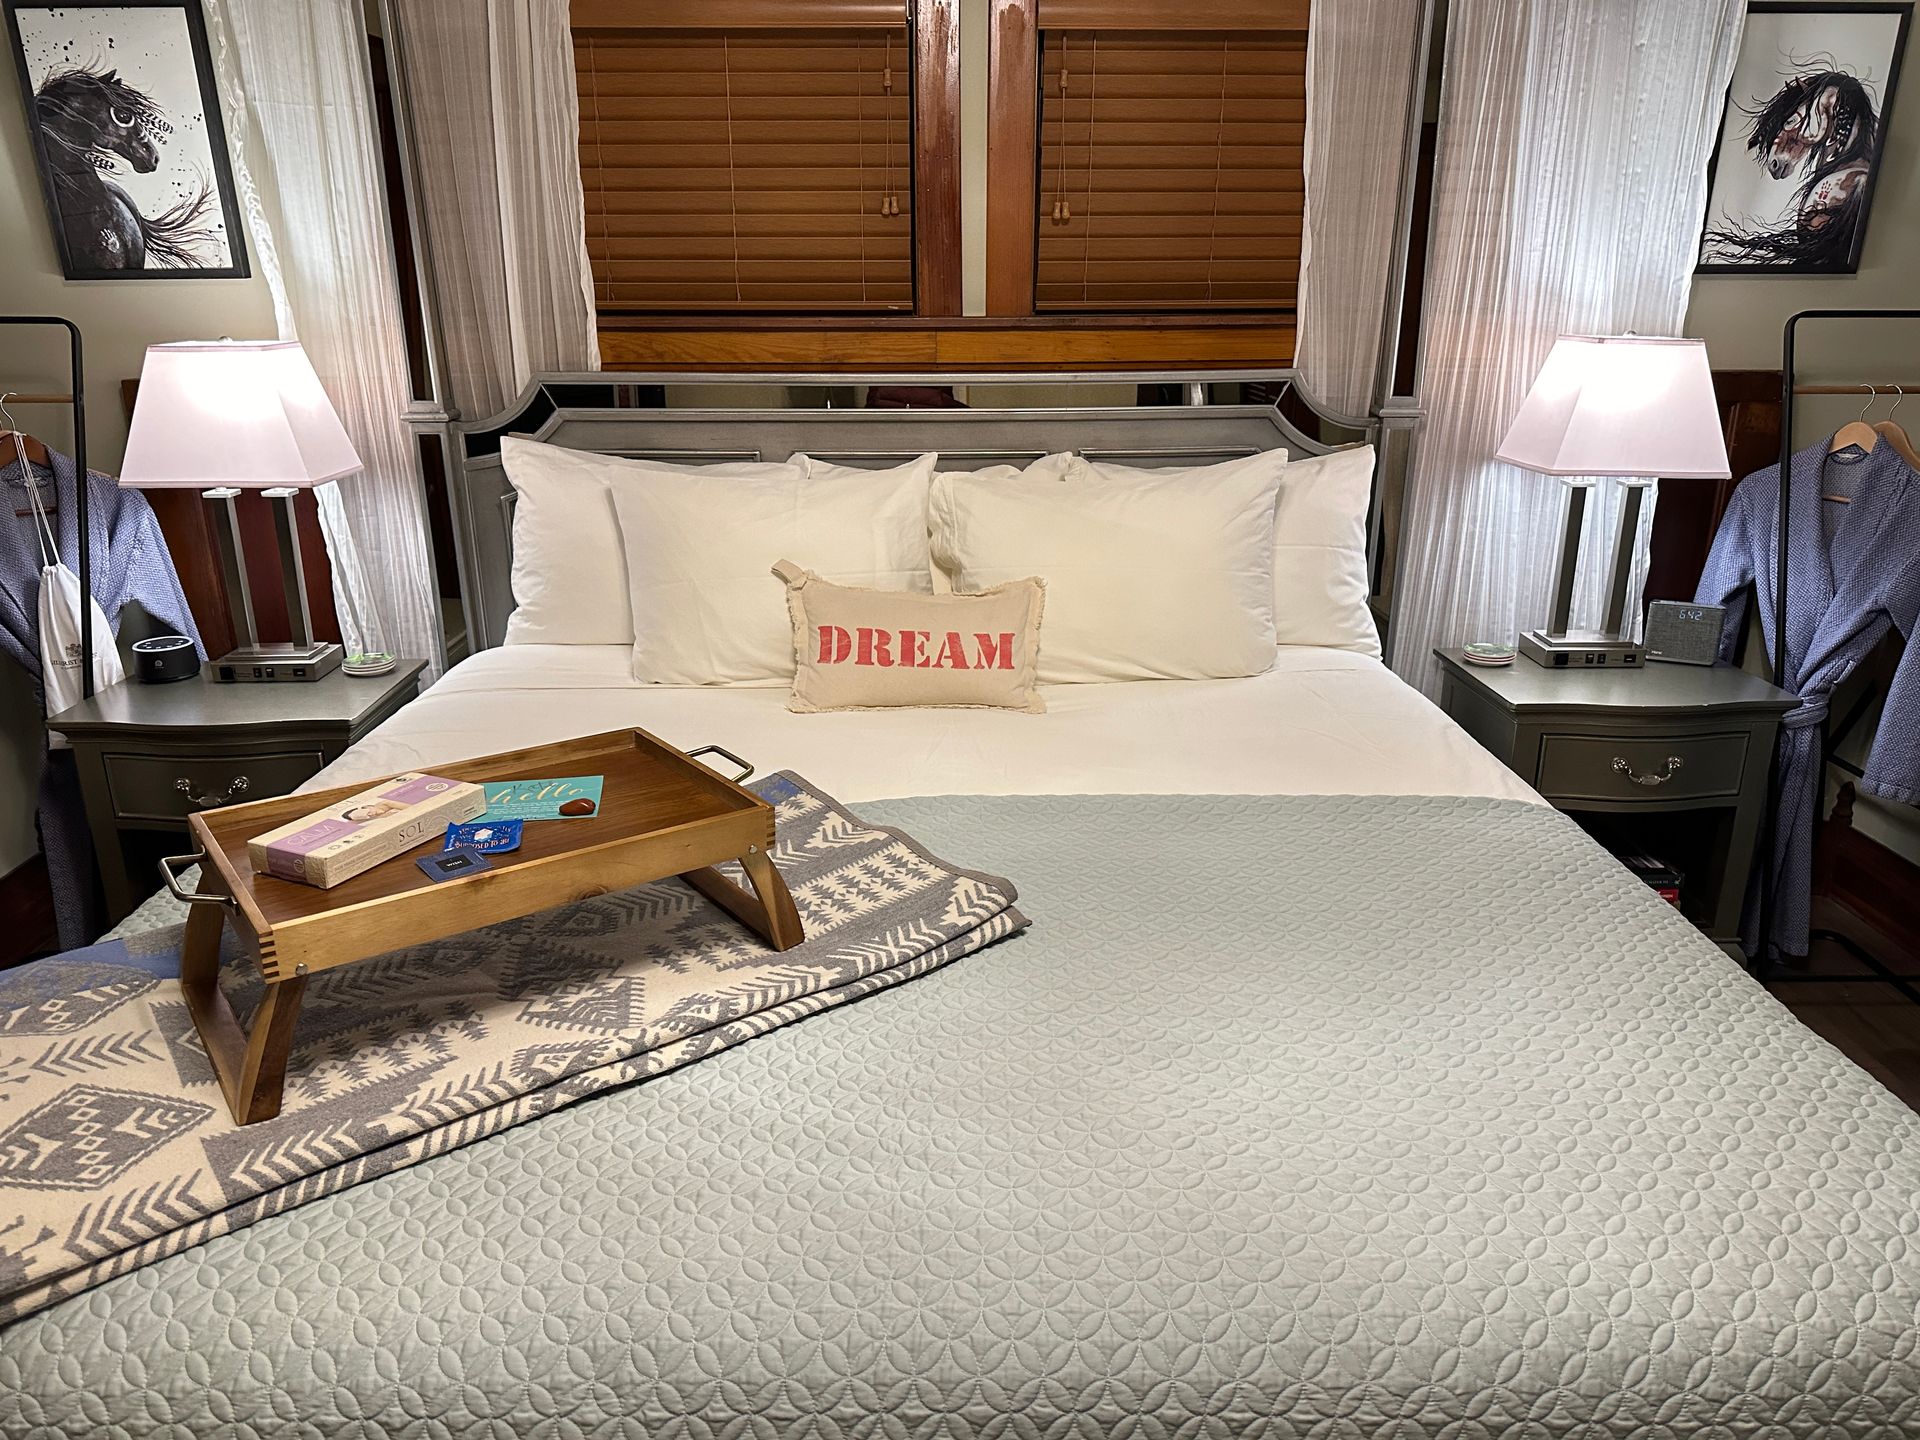 A bed with a tray on it and a pillow that says `` dream ''.